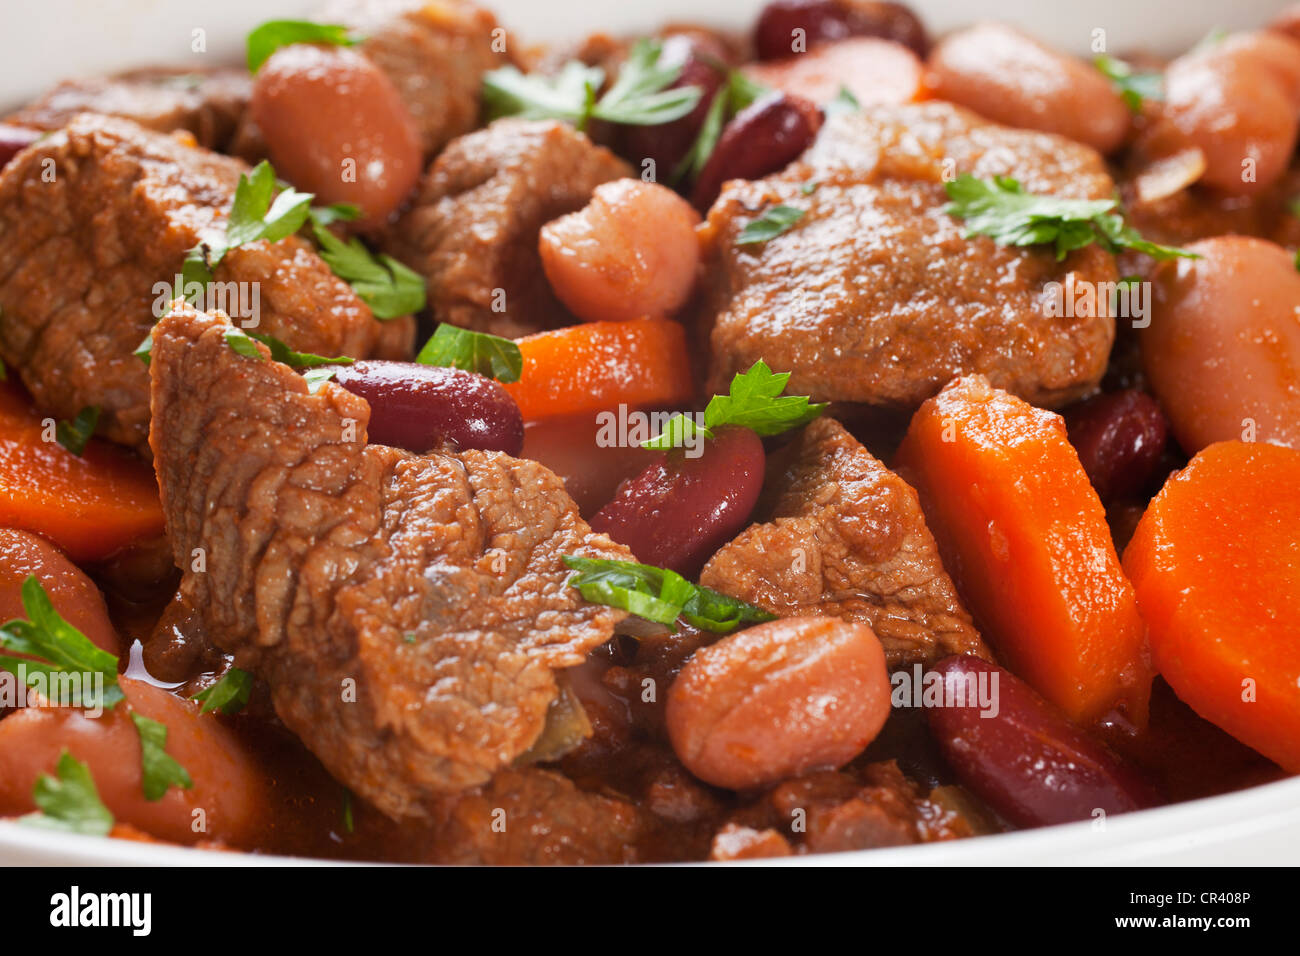 A simple bowl of stew with carrots and beans. Stock Photo